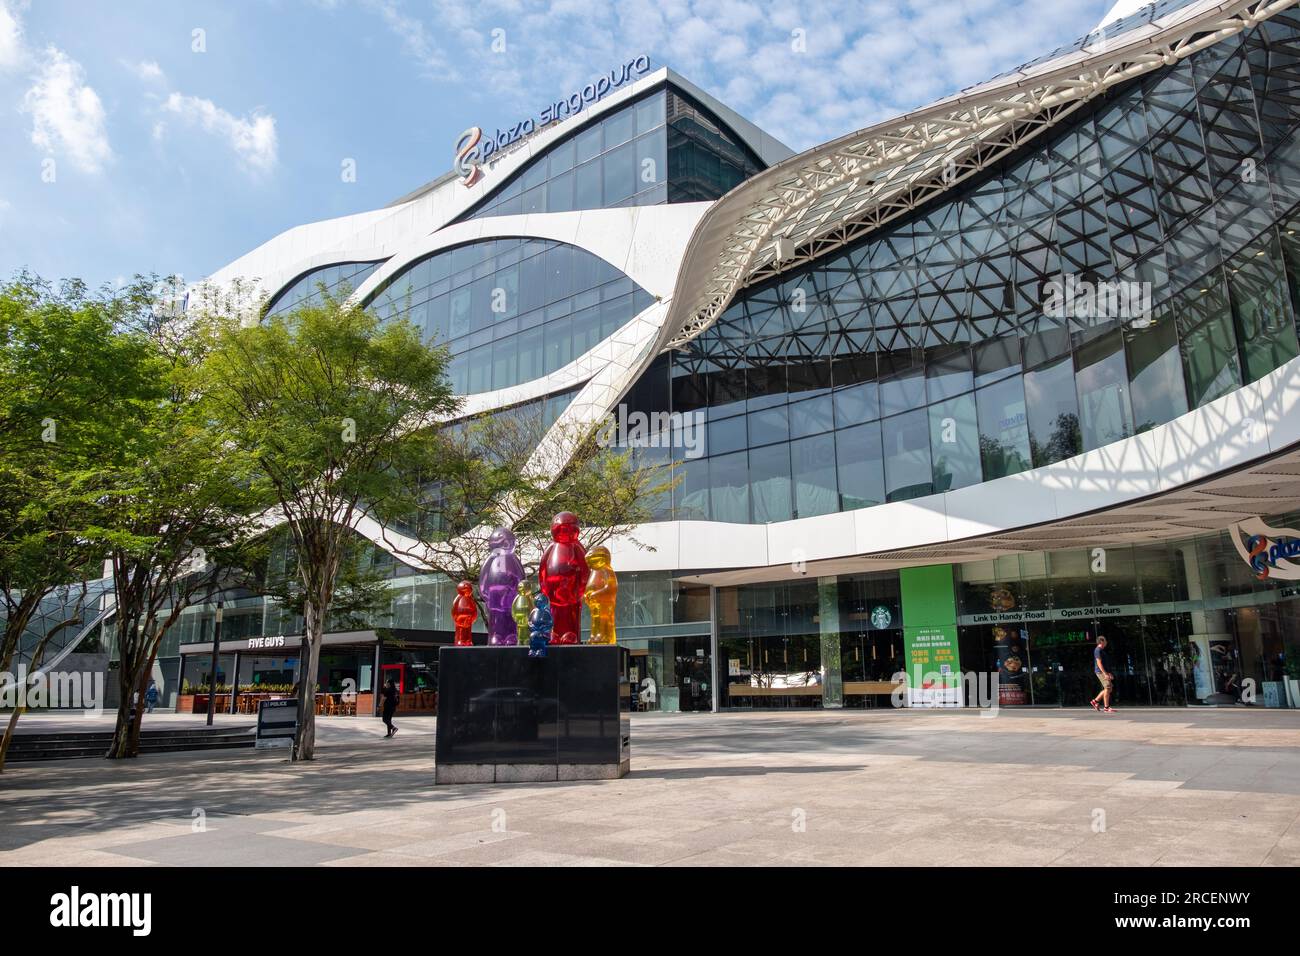 Singapore - 20 October 2022: Plaza Singapura. It is a contemporary shopping mall located along Orchard Road, Singapore, next to Dhoby Ghaut MRT statio Stock Photo